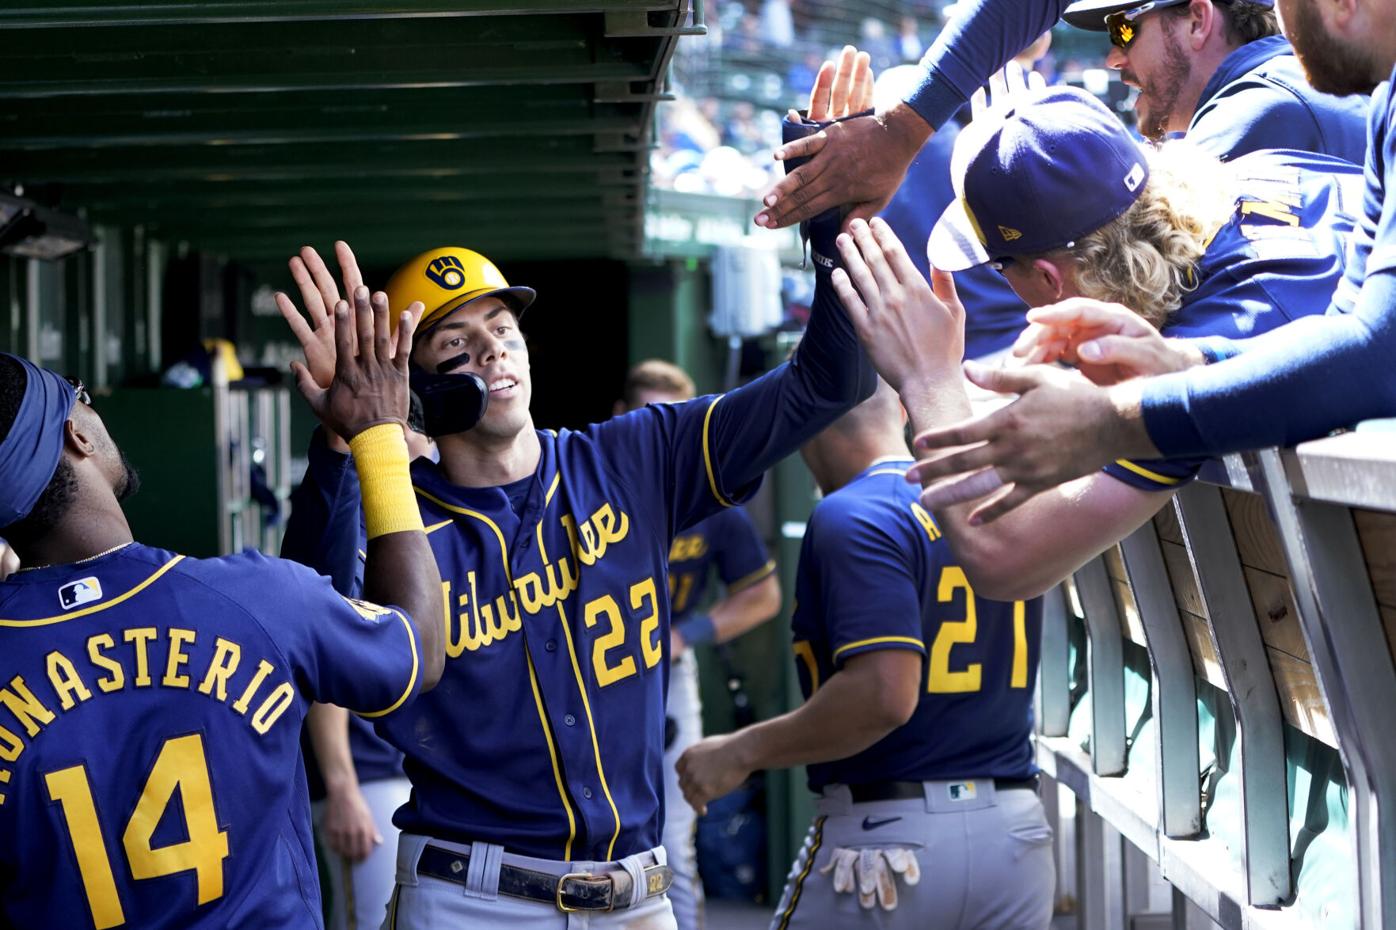 Willy Adames pays big dividends for Brewers on offense and defense